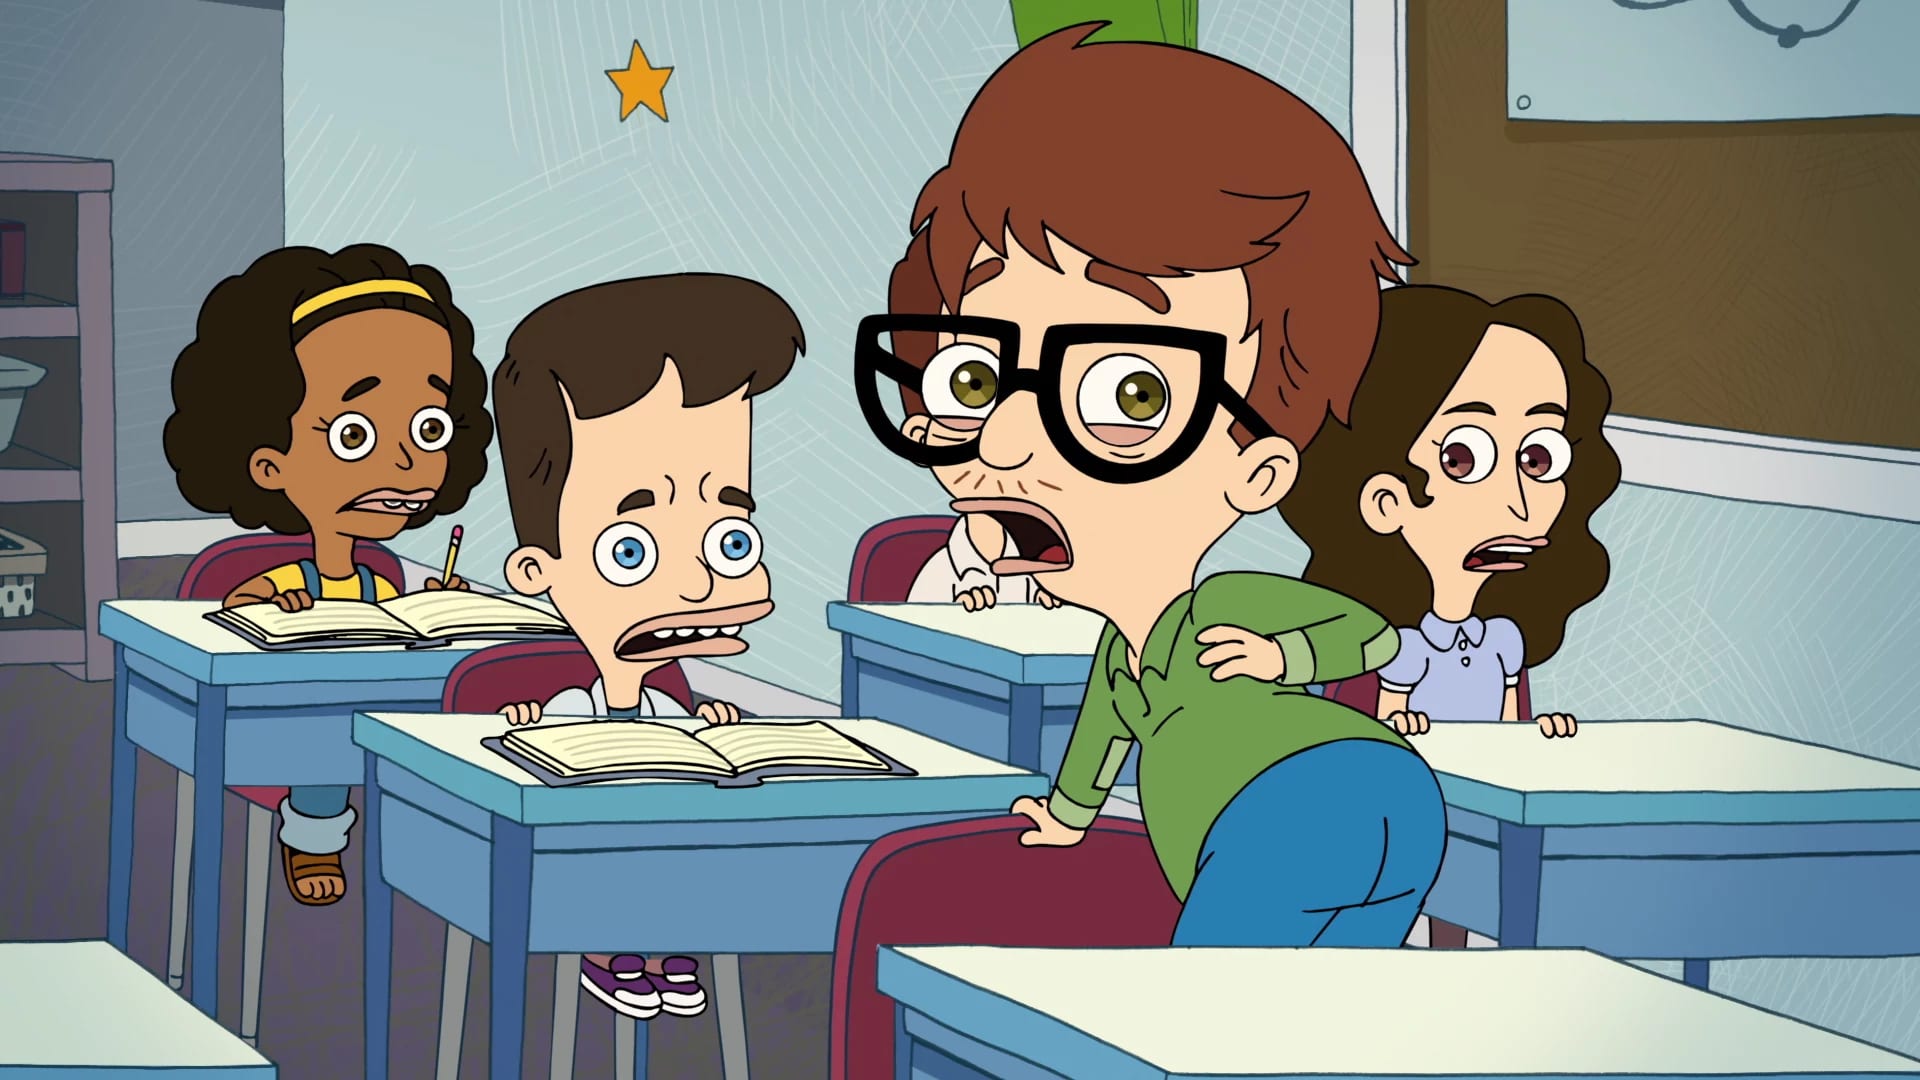 Big Mouth Porn - Watch Big Mouth season 1 episode 10 streaming online | BetaSeries.com